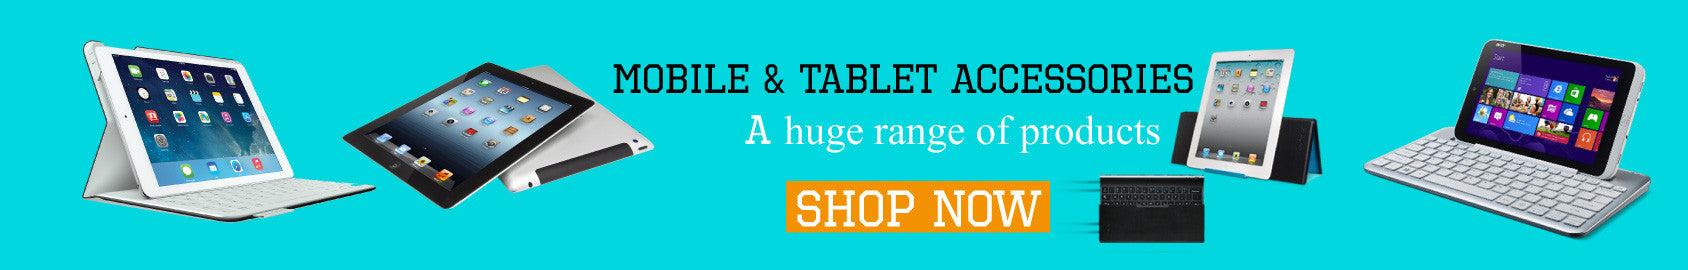 Mobile and Tablet Accessories